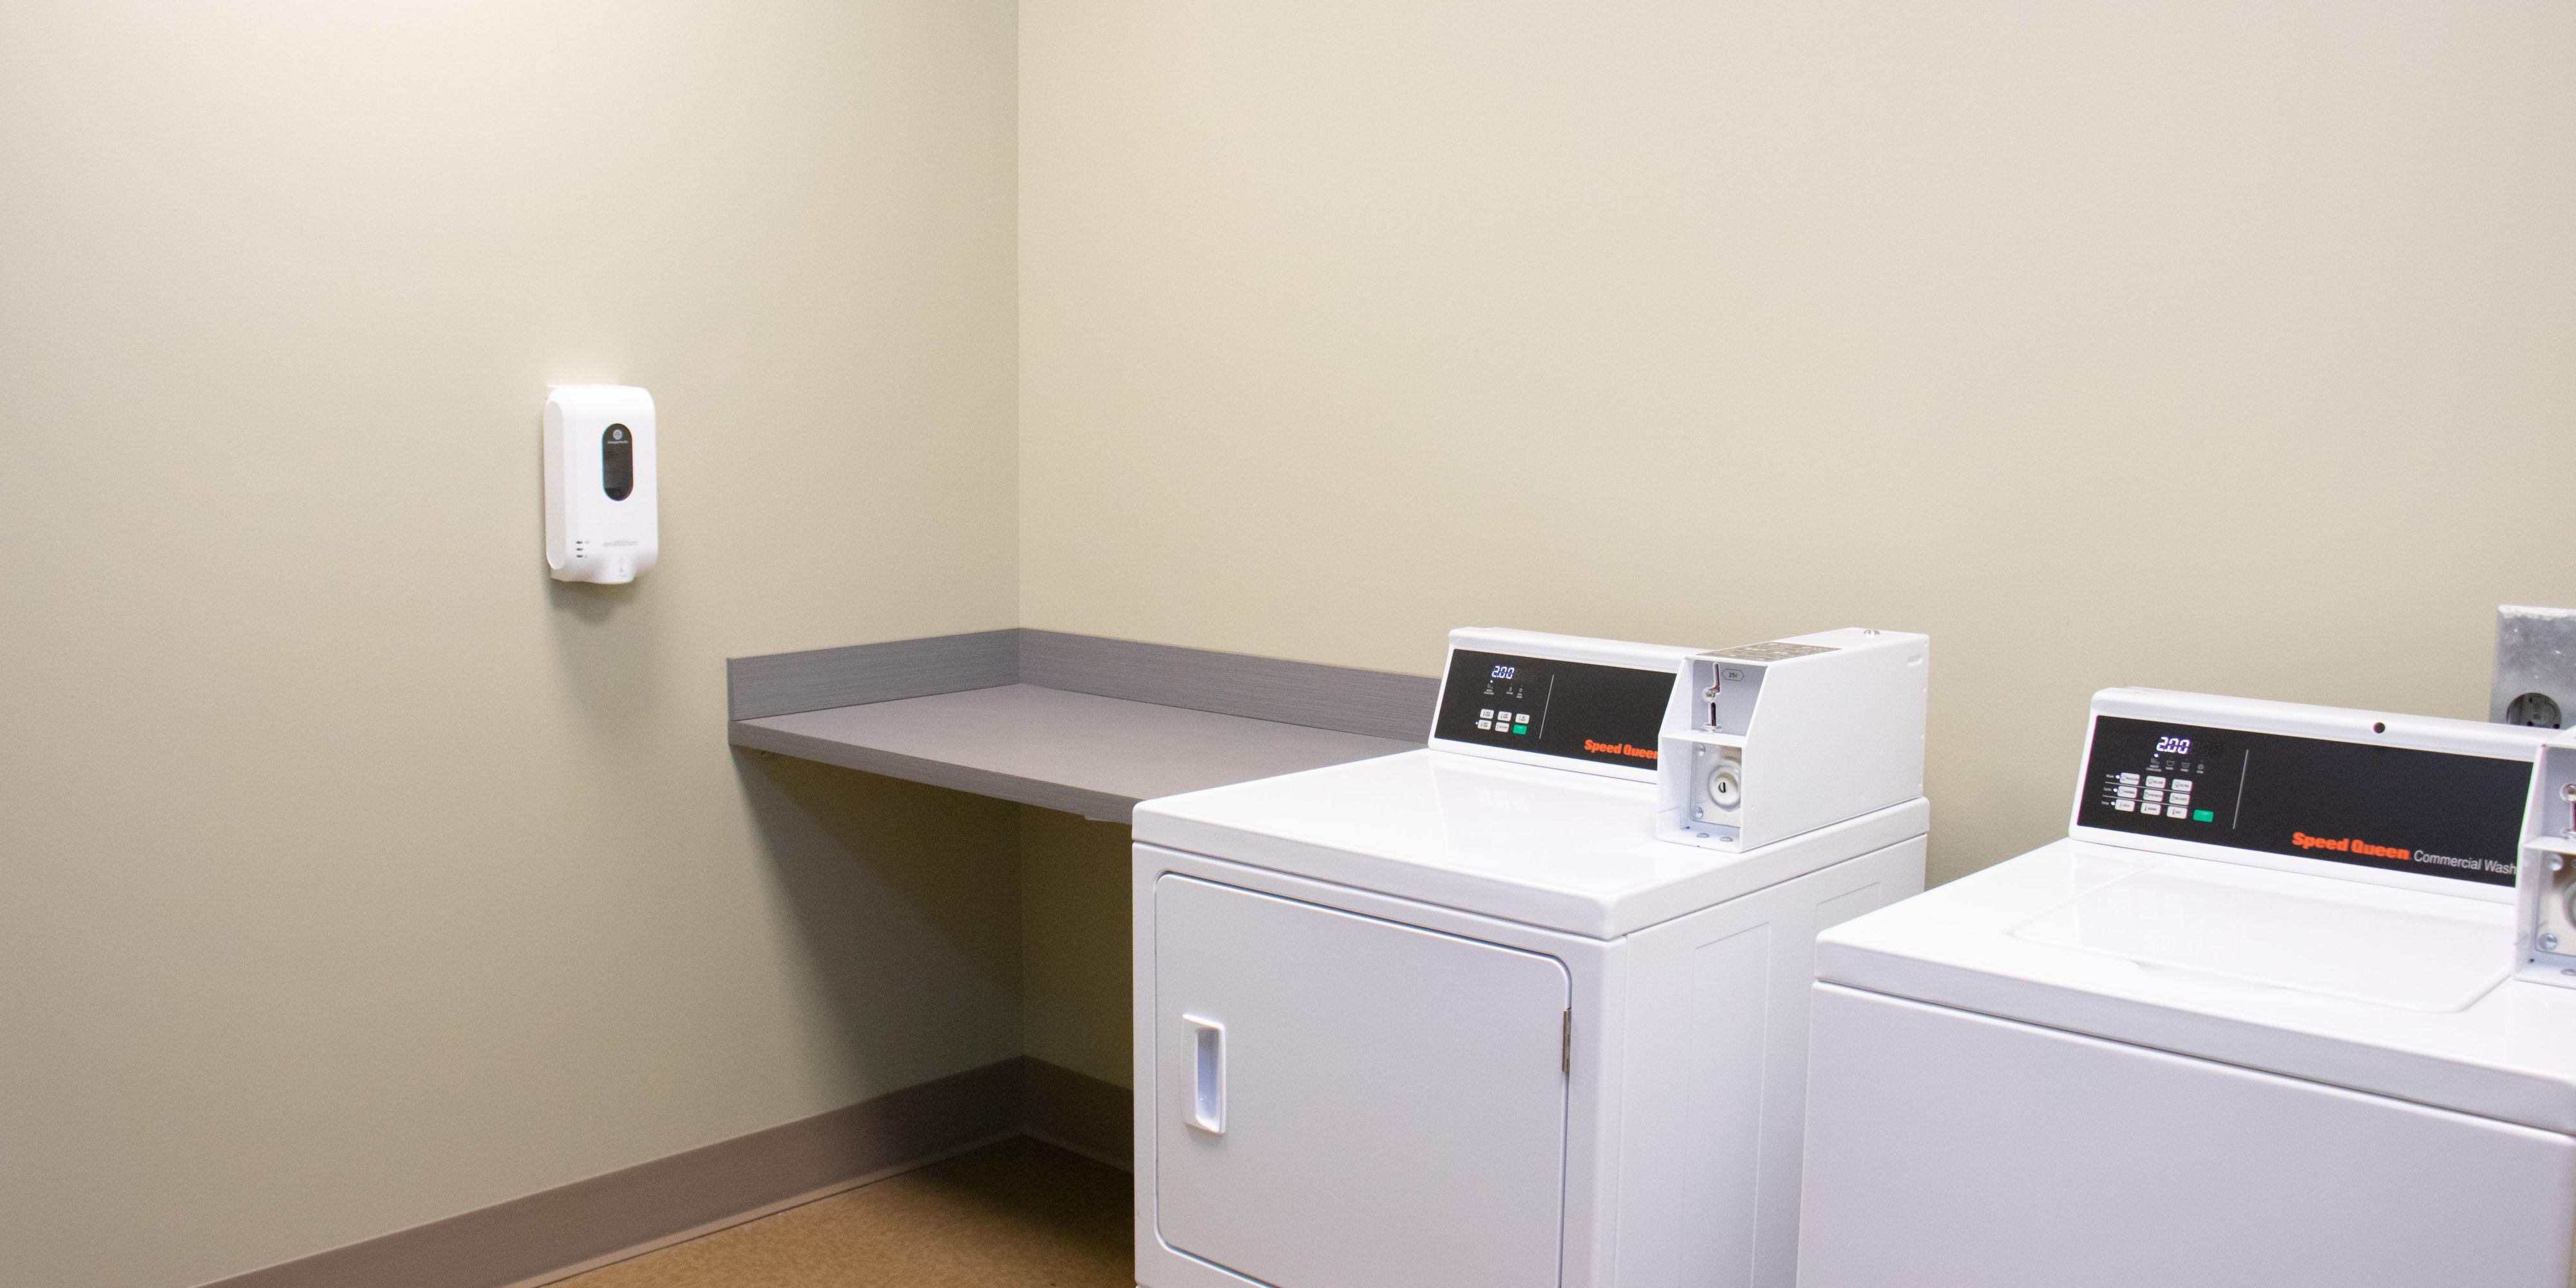 Need to run a quick load of laundry? No problem! Our hotel offers an onsite washer and dryer. Quarters and purchase of laundry detergent available at our Front Desk.